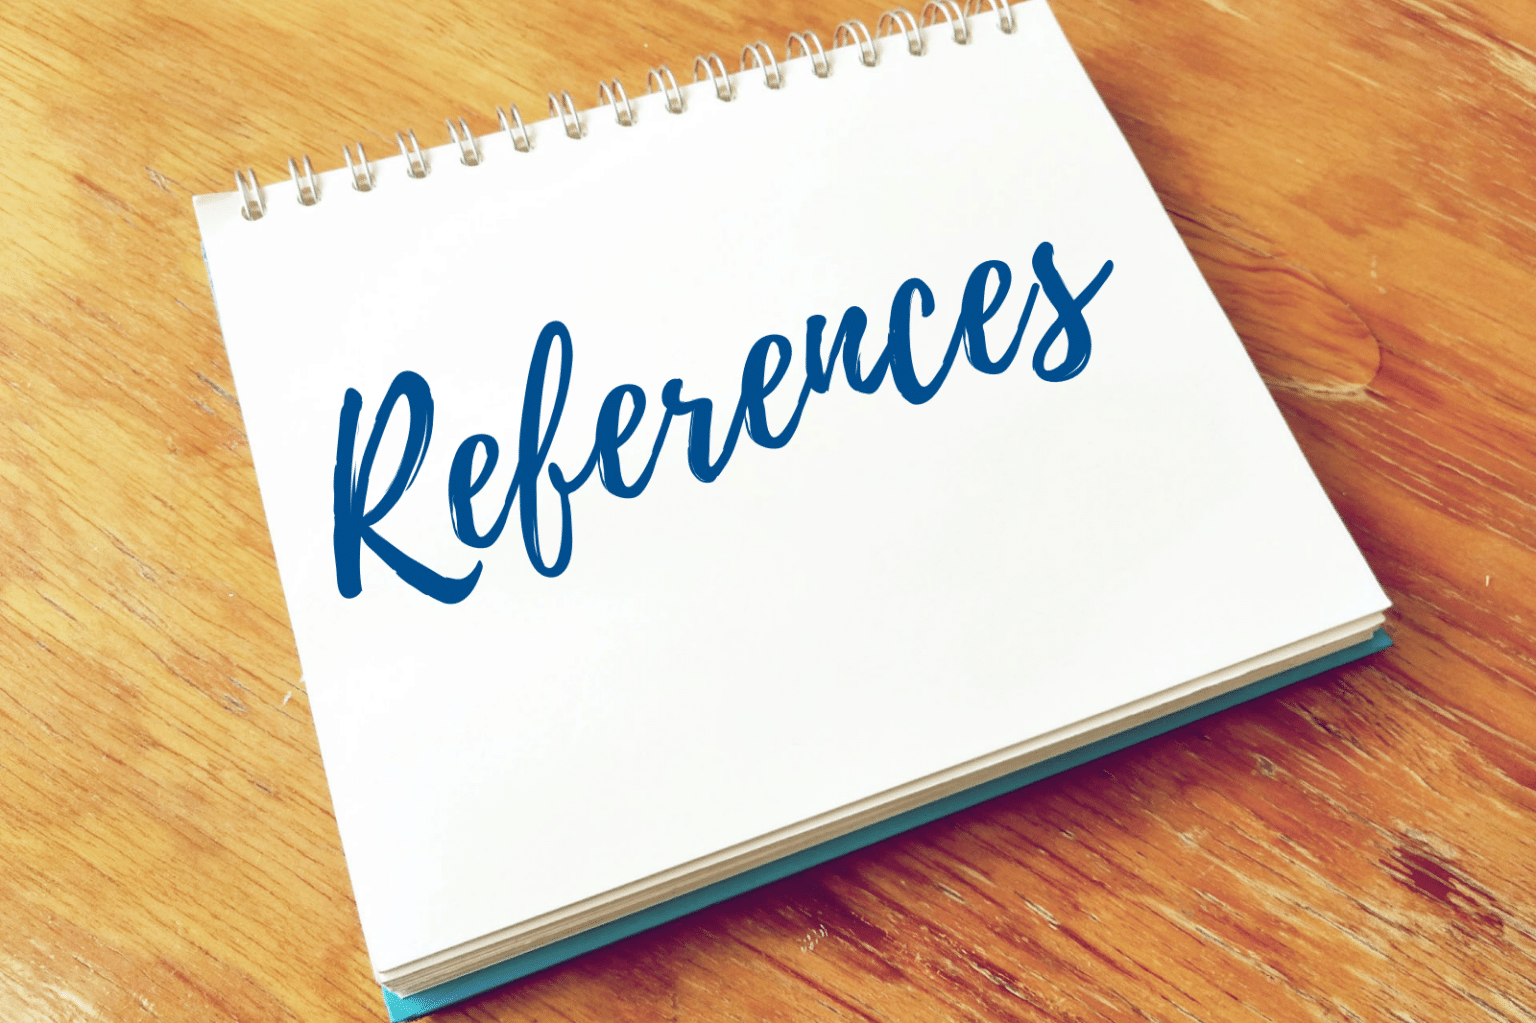 references for business research